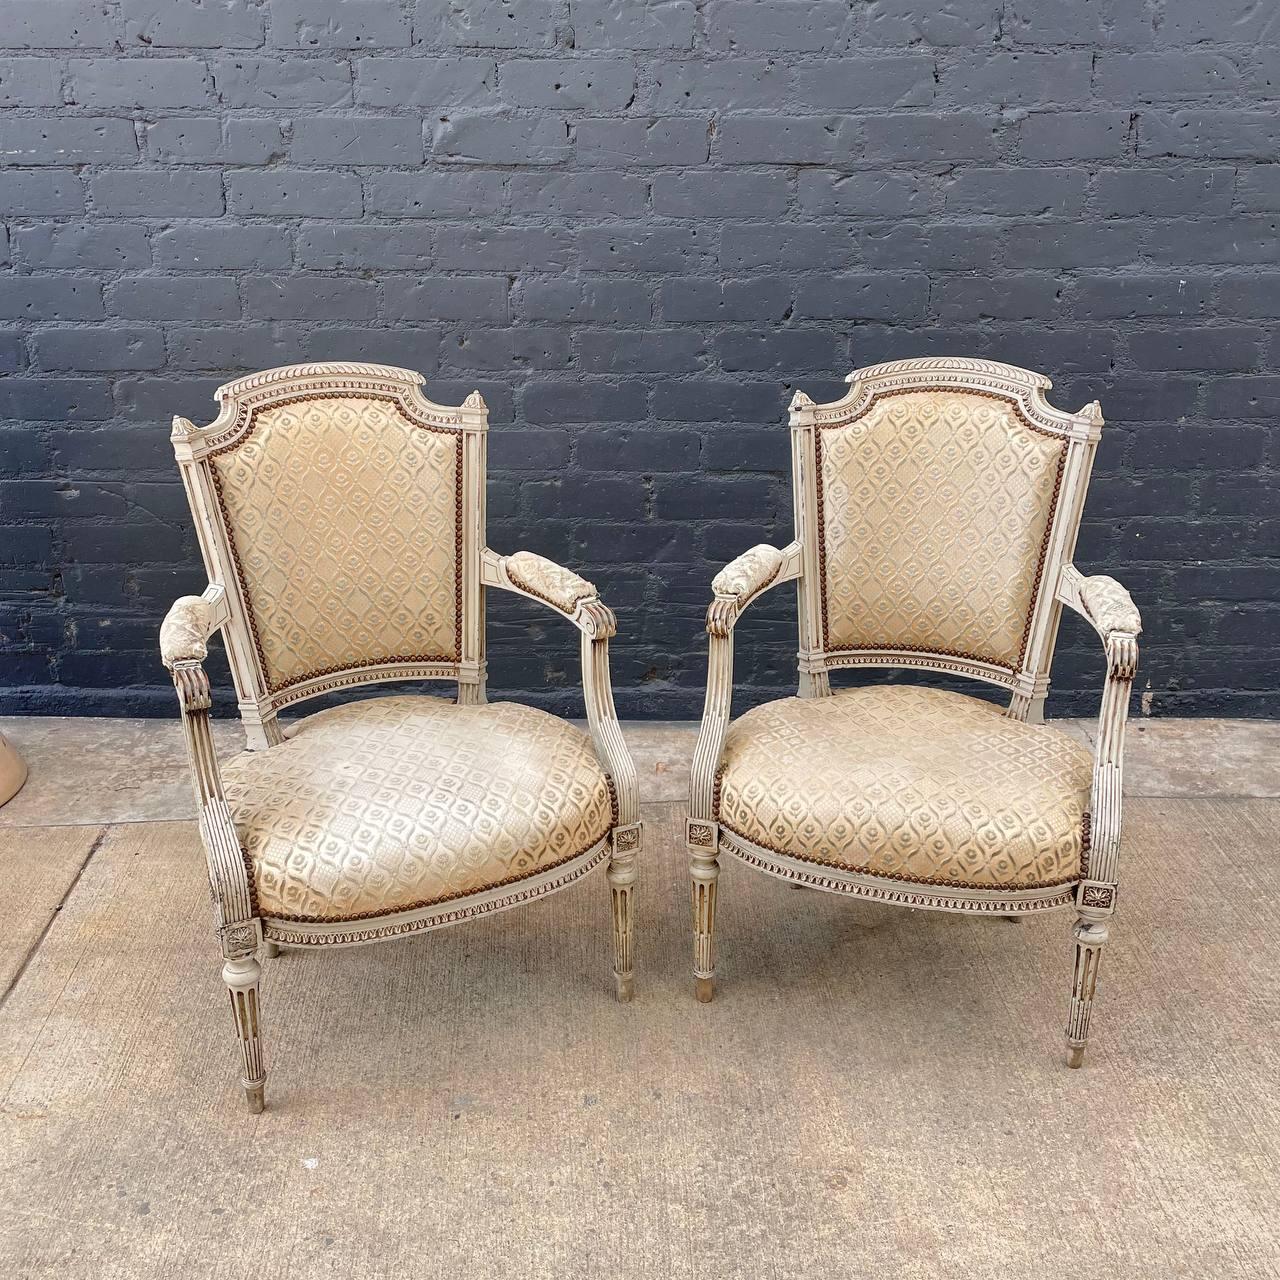 Pair of French Antique Louis XVI Style Hand Carved Arm Chairs

Country: France
Materials: Carved Wood
Style: French Antique
Year: 1920s

Dimensions:
36.50”H x 23”W x 20”D
Seat Height 16”